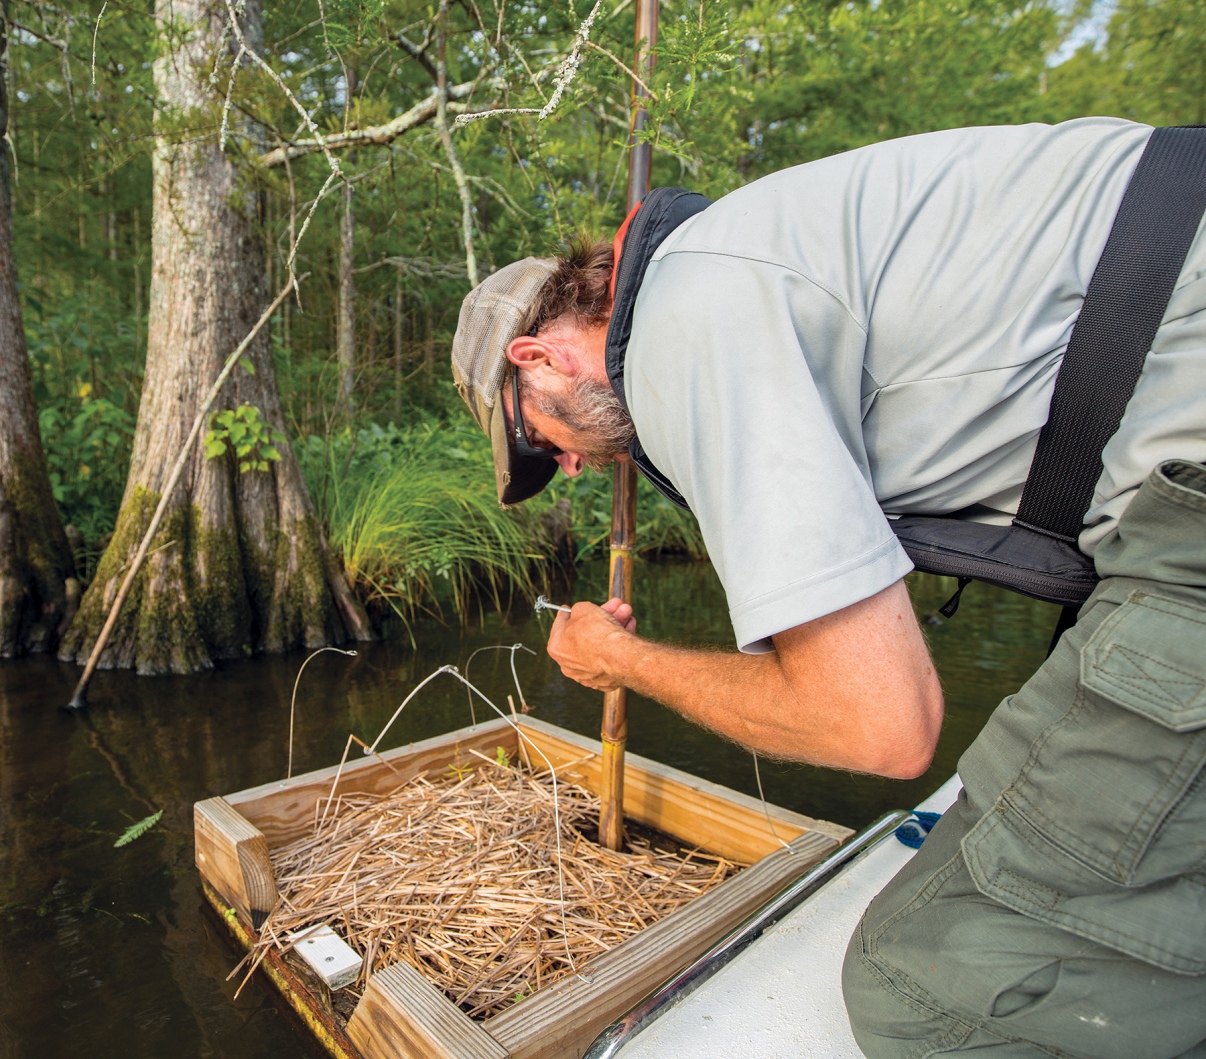 A biologist checking a wooden platform covered in hay (a nutria detection platform) for hair samples